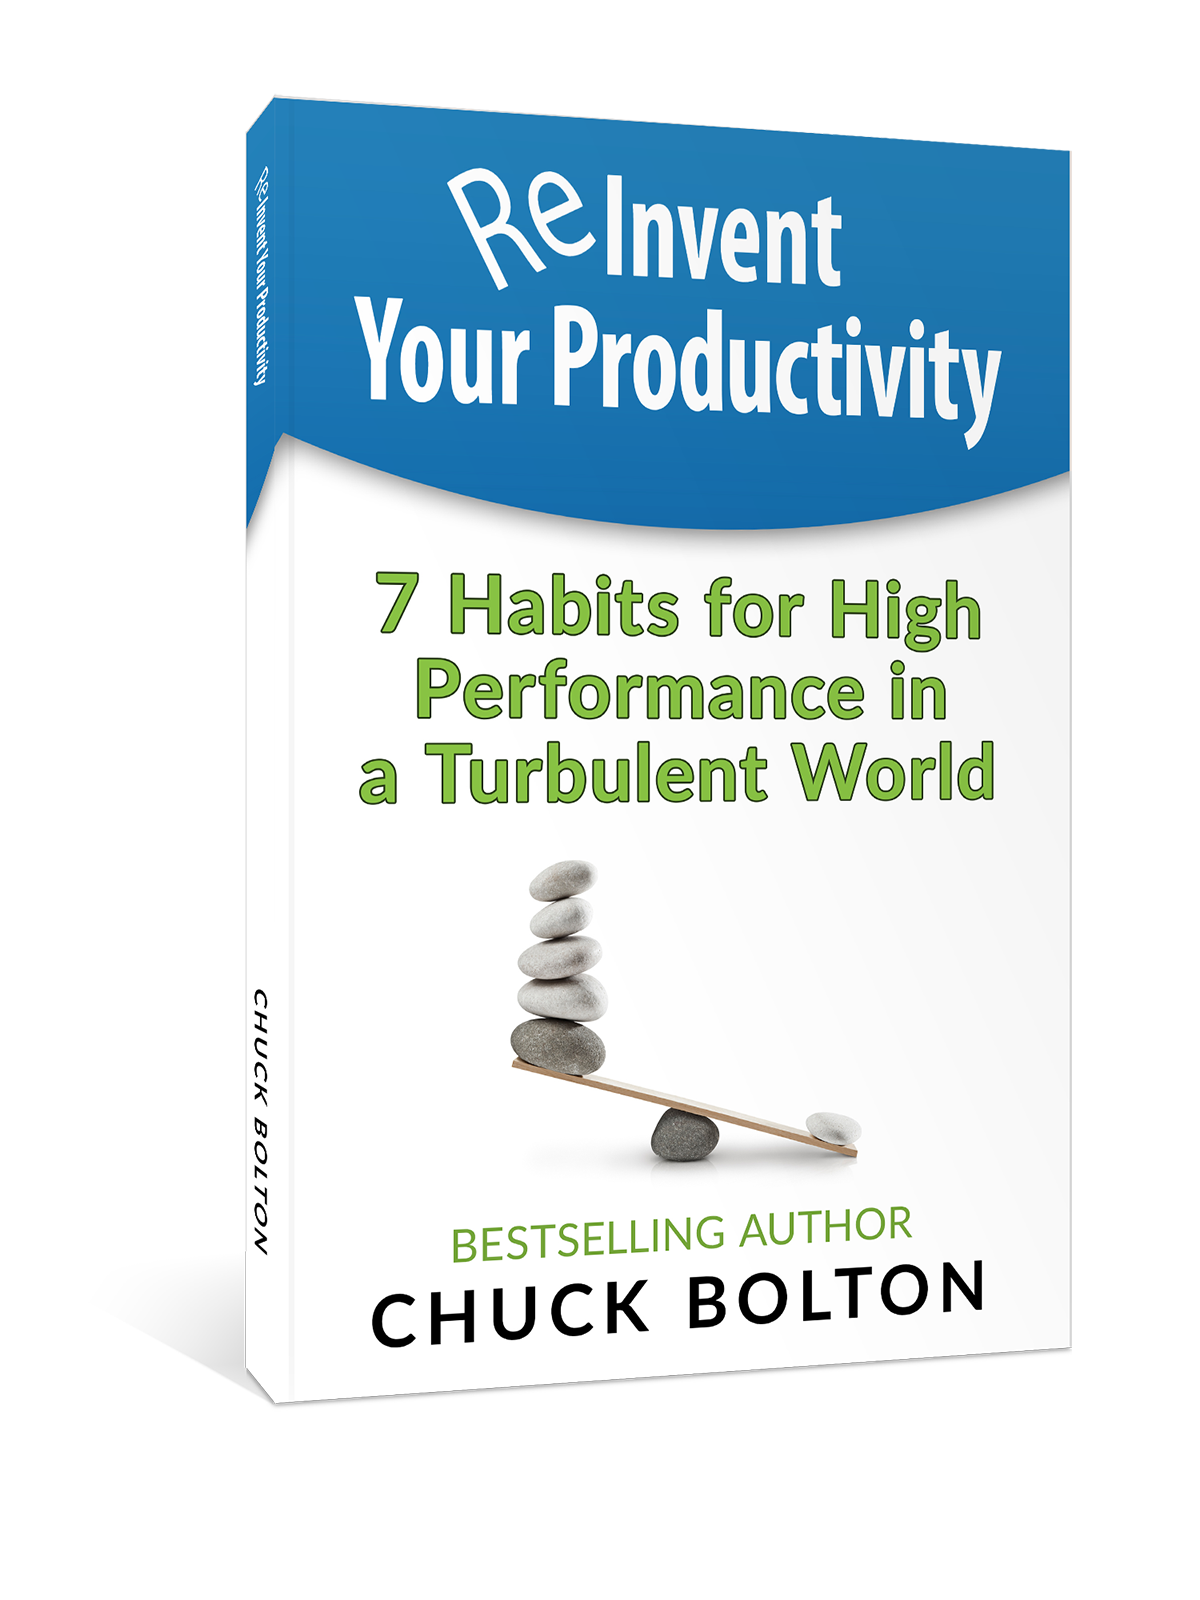 Reinvent Your Productivity - Bestselling Book by Executive Coach Chuck Bolton